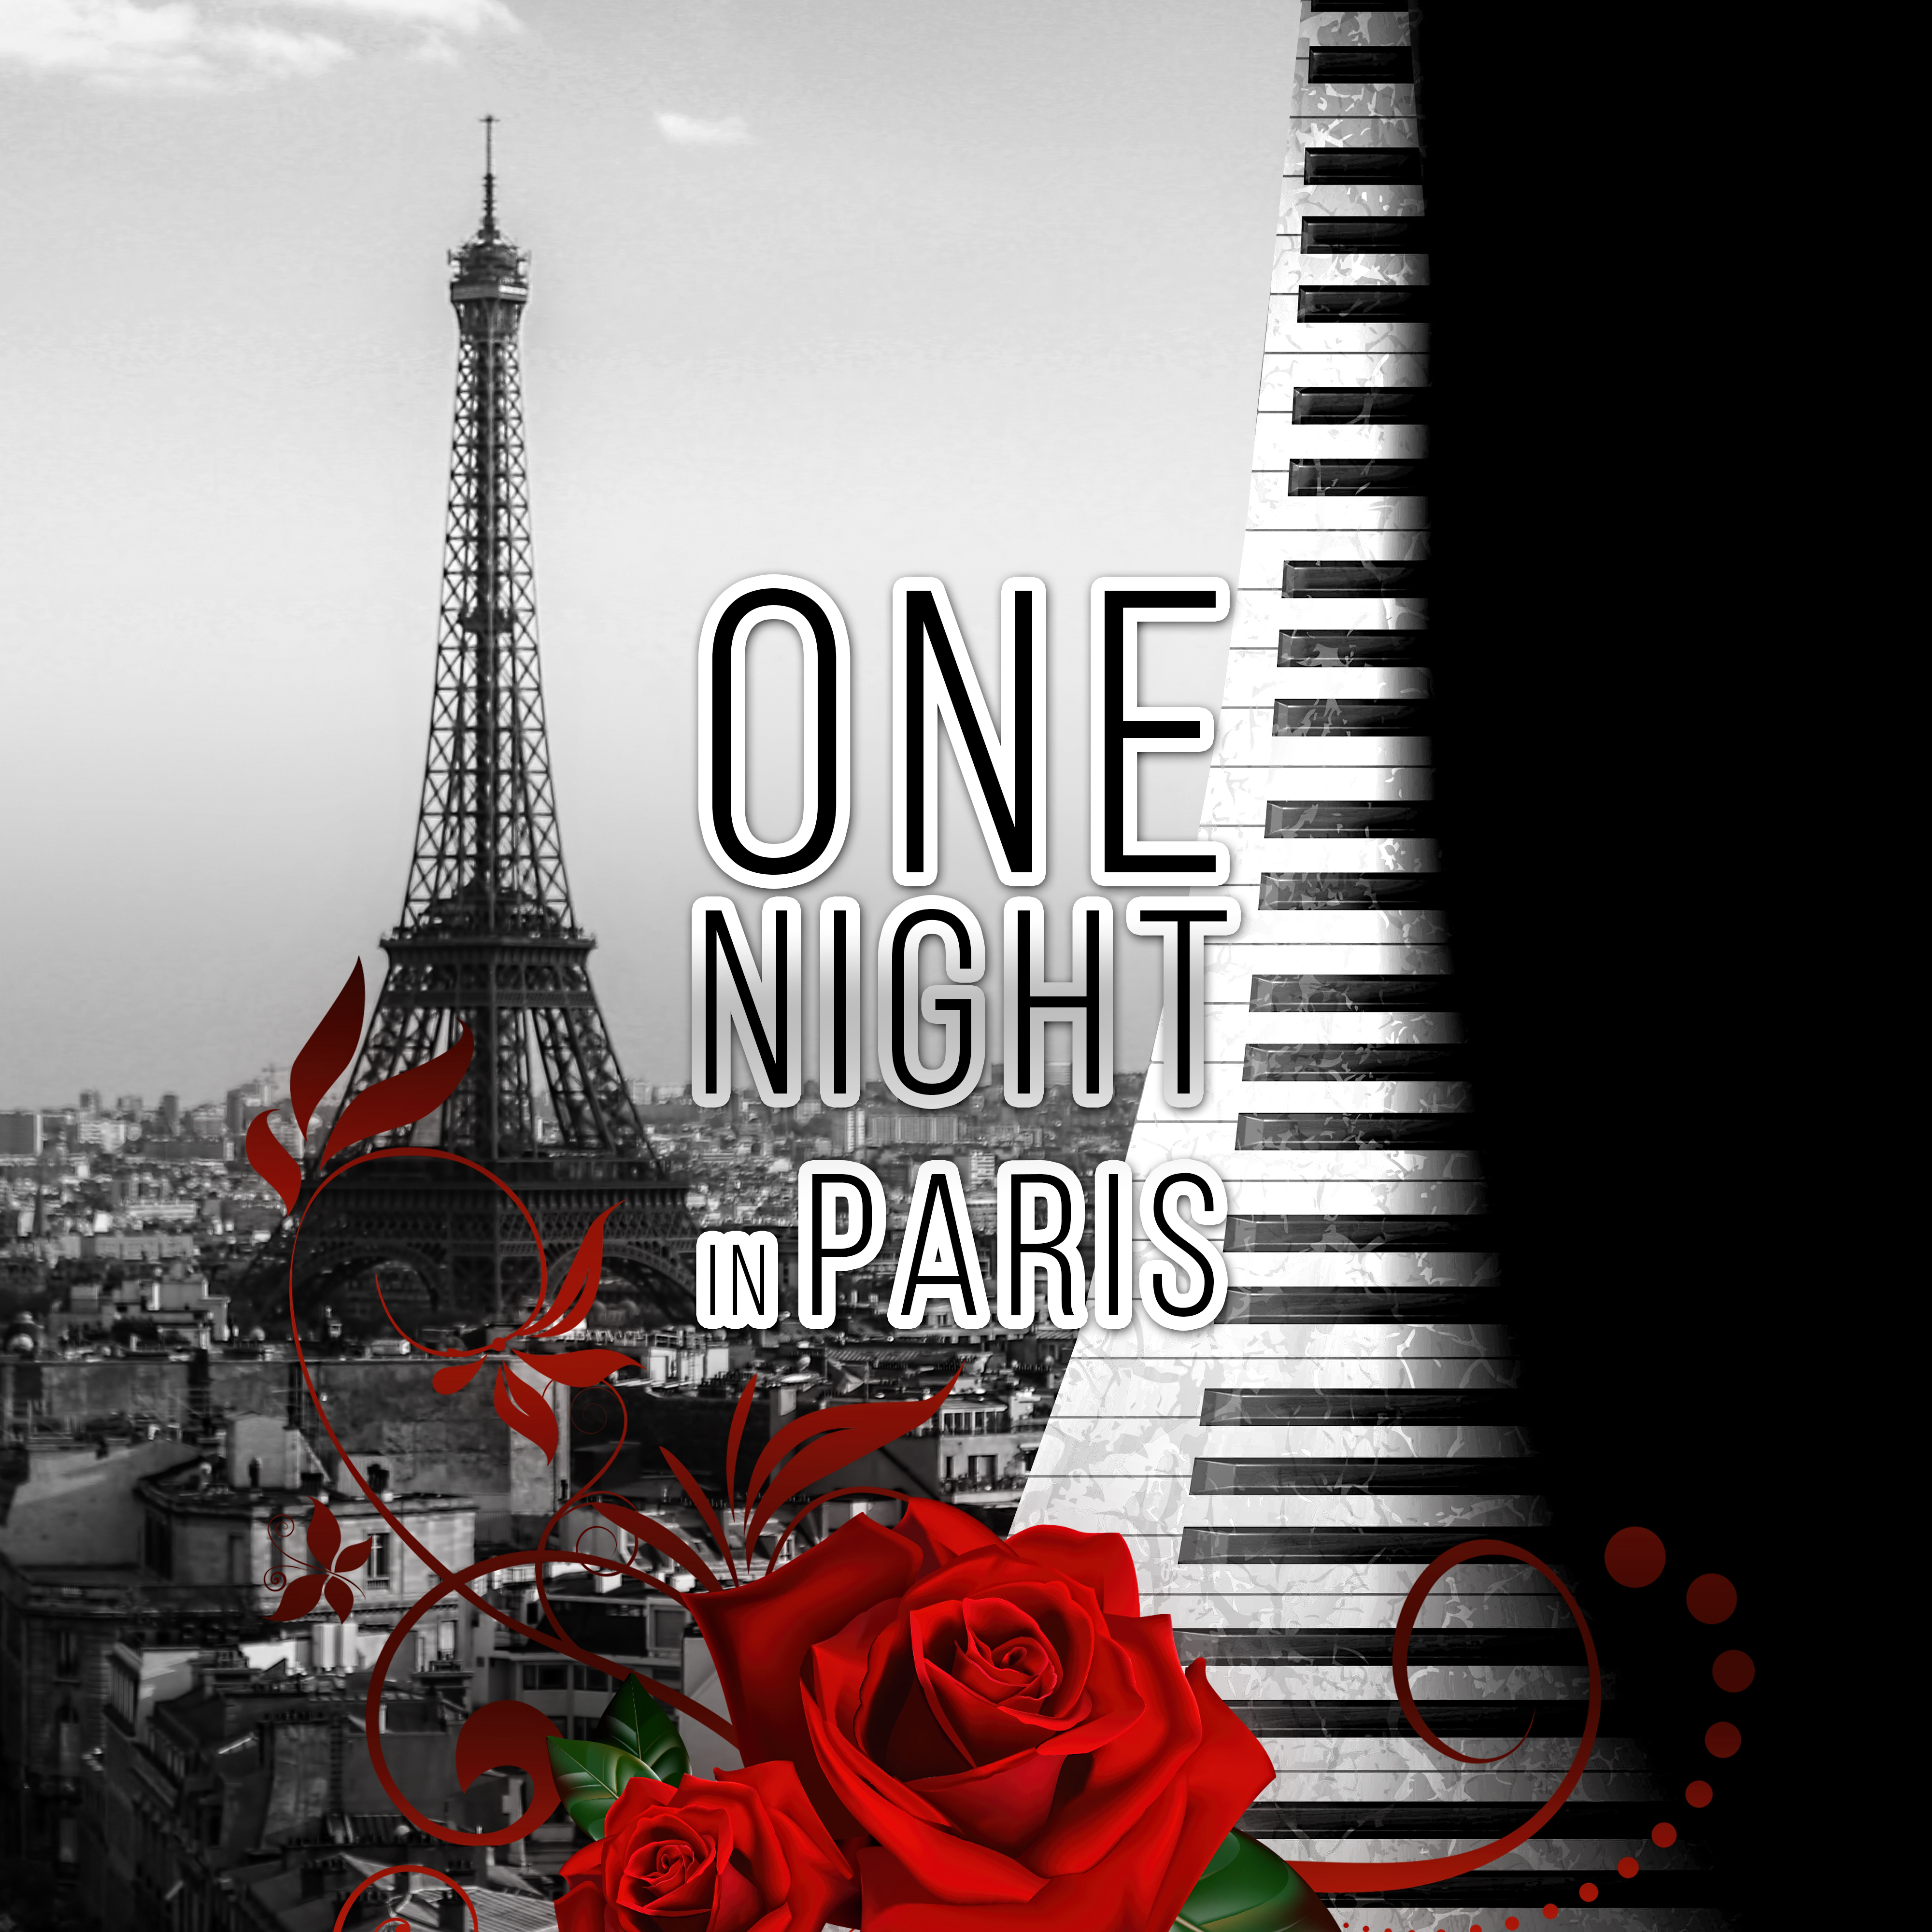 One Night in Paris - The Best Piano Jazz Music for Cocktail Party & Romantic Dinner Time, Eiffel Tower, Piano Bar Music, Cafe Paris, Chillout Music to Relax